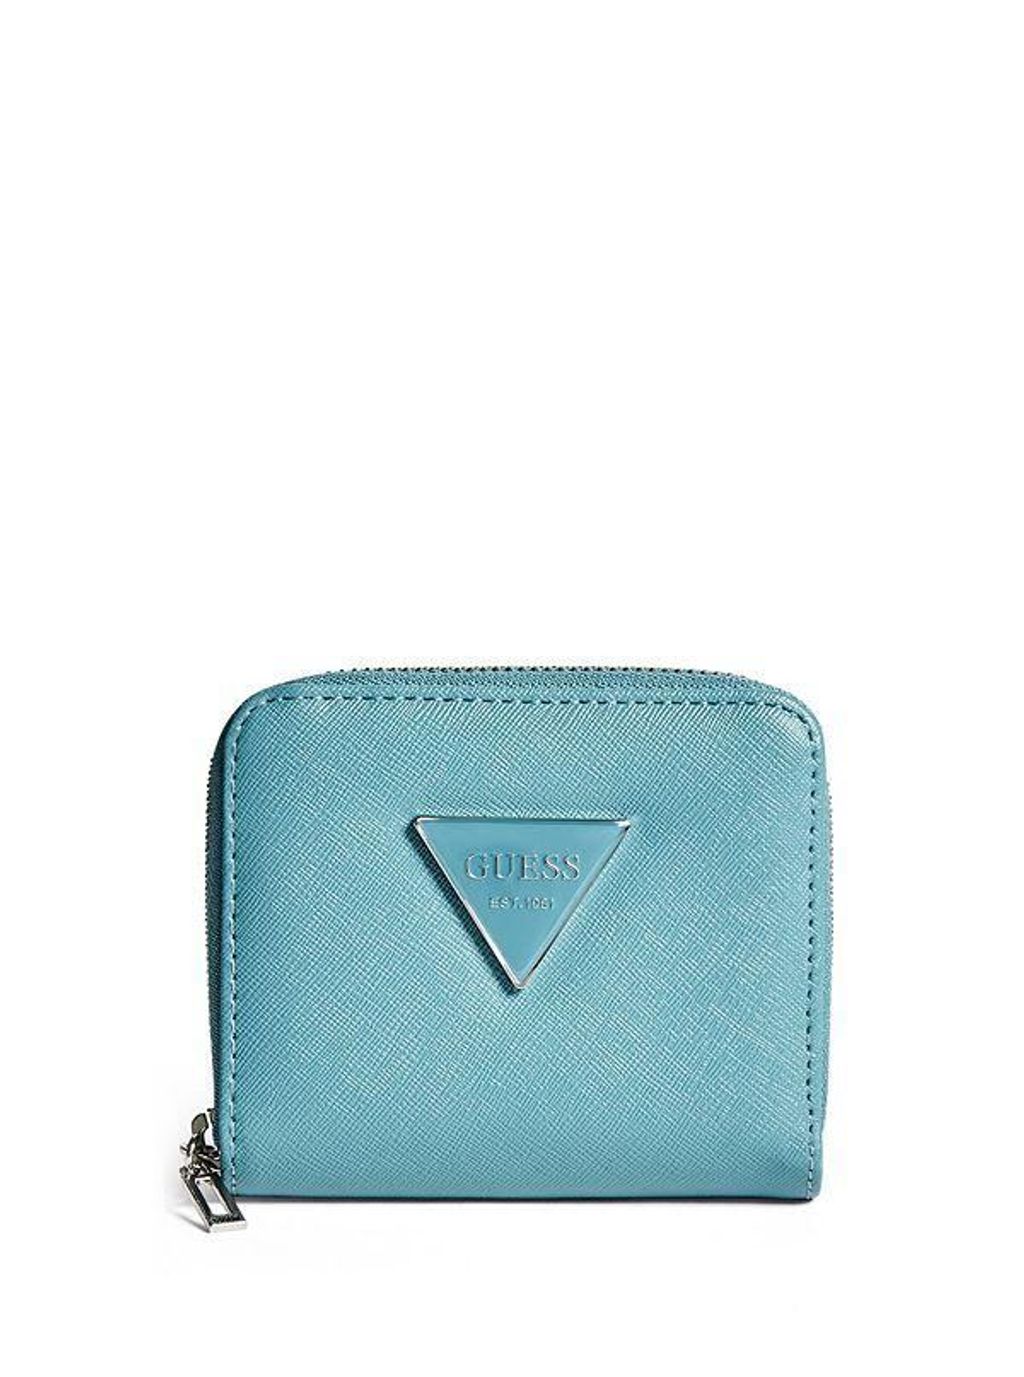 guess ABREE SMALL ZIP-AROUND WALLET $24.99 to $17 w tax for 10